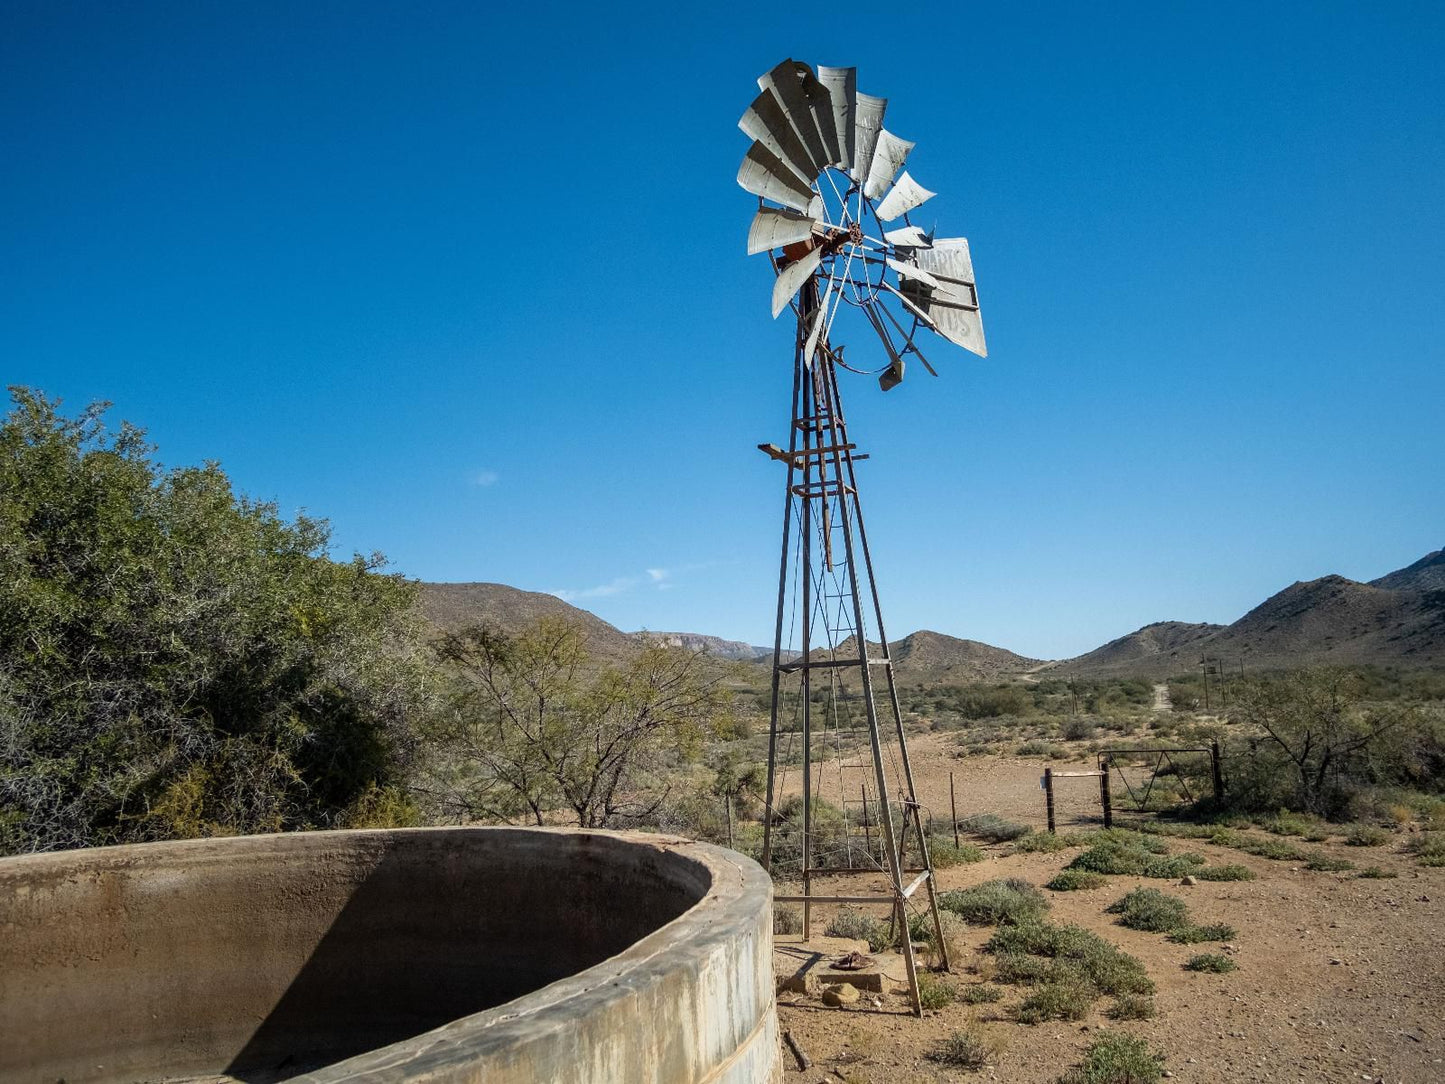 Bushman Valley Prince Albert Western Cape South Africa Cactus, Plant, Nature, Windmill, Building, Architecture